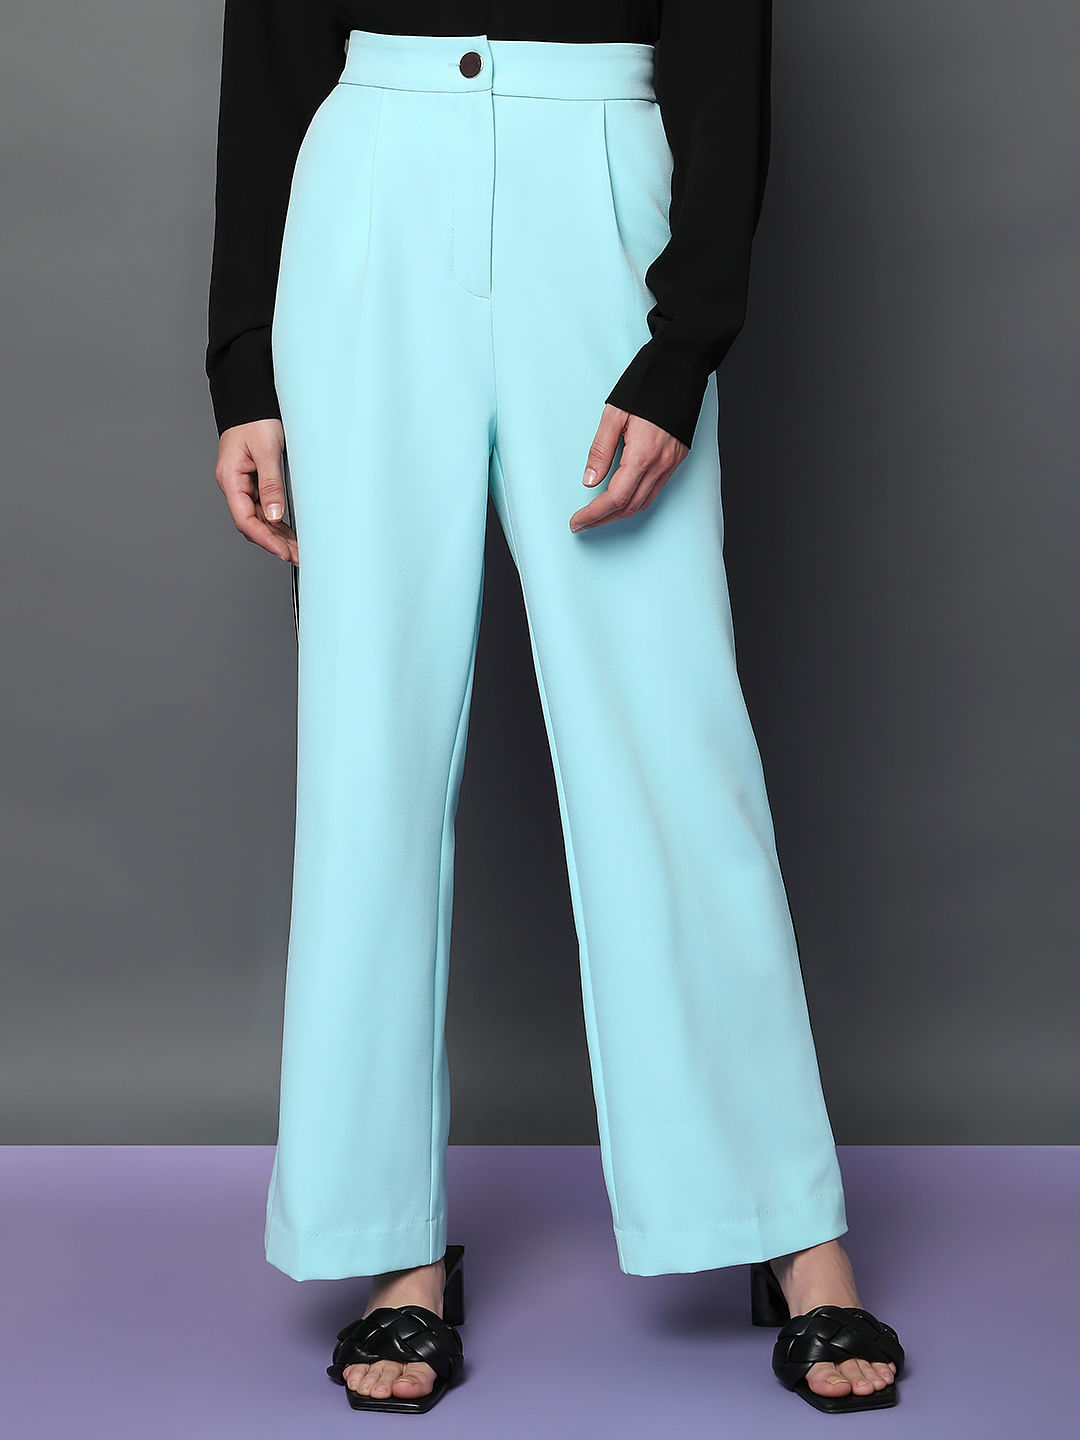 Buy Sky Blue Rayon Solid Women Regular Wear Pant for Best Price, Reviews,  Free Shipping